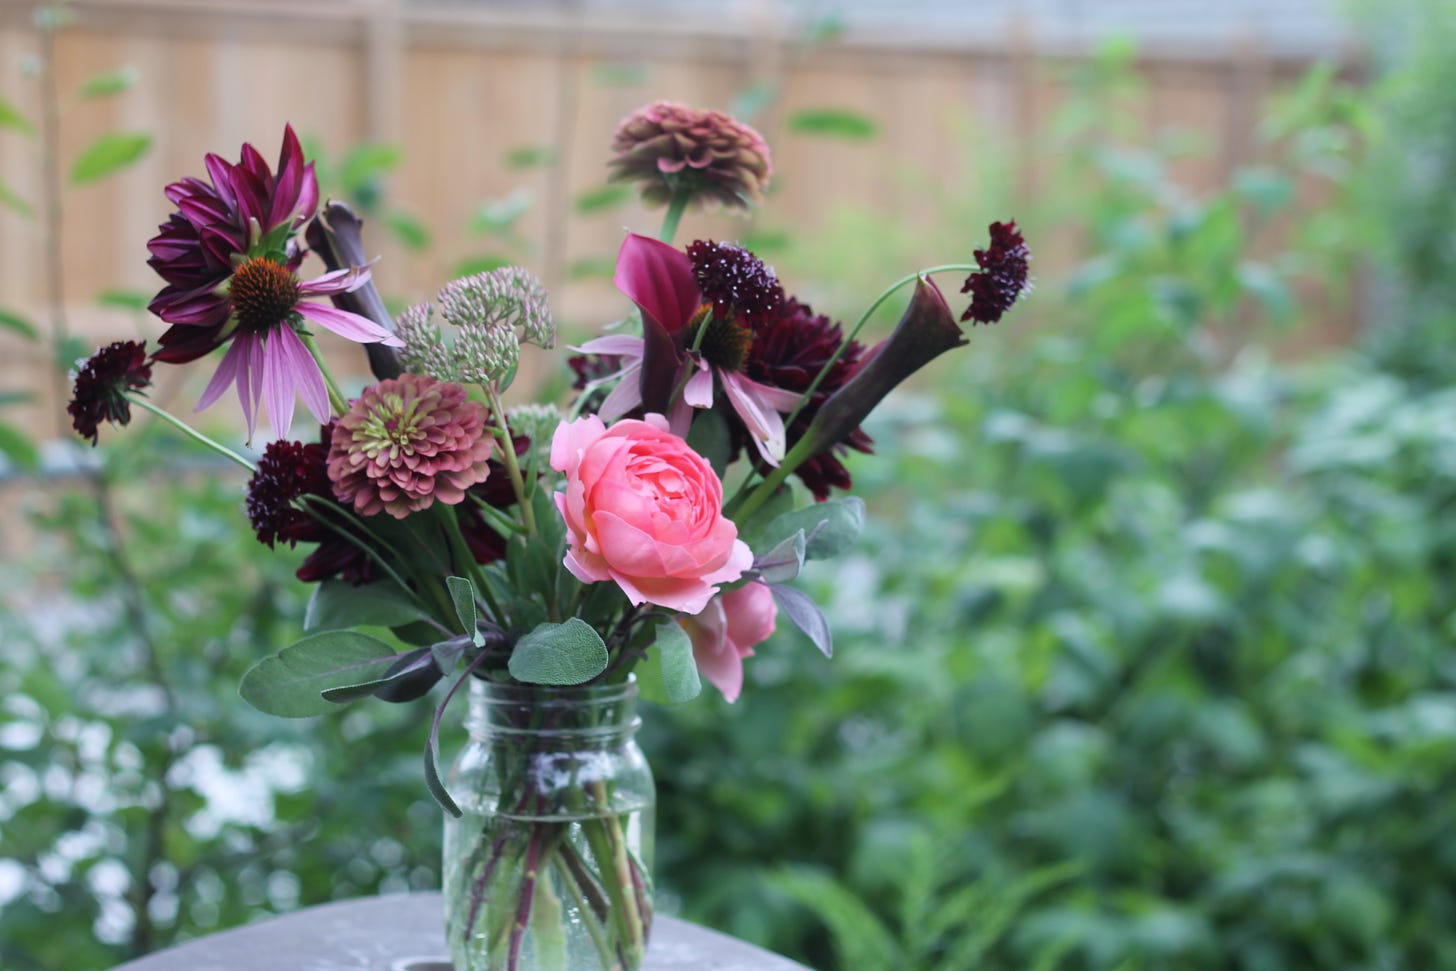 A bouquet of pink and purple flowers sits in a mason jar on a table outside.